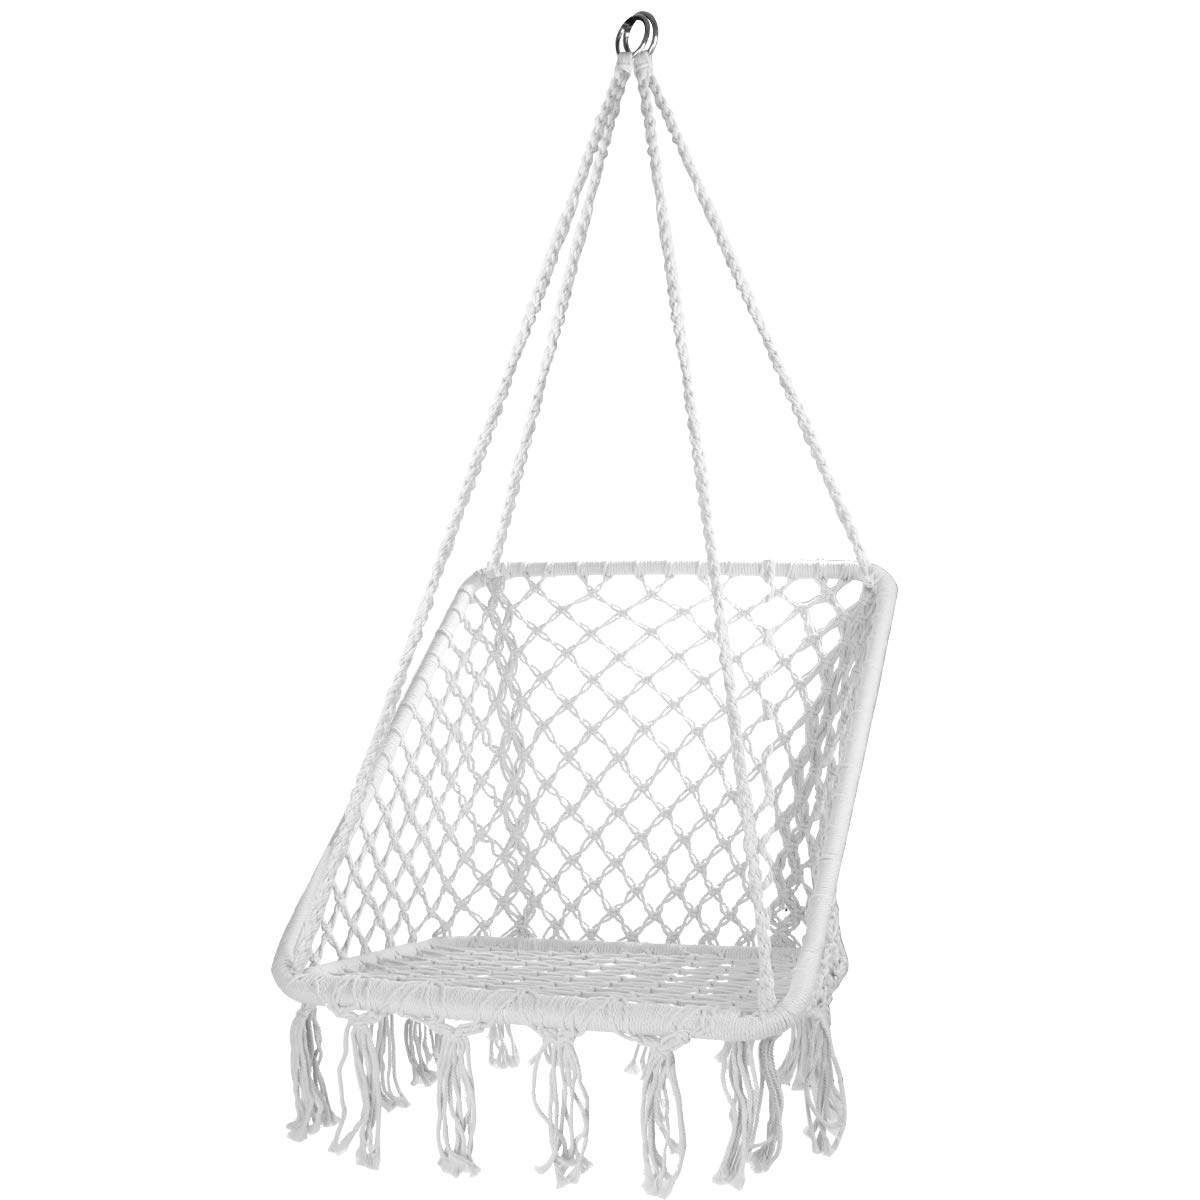 Square Cotton Rope Swing Hanging Chair